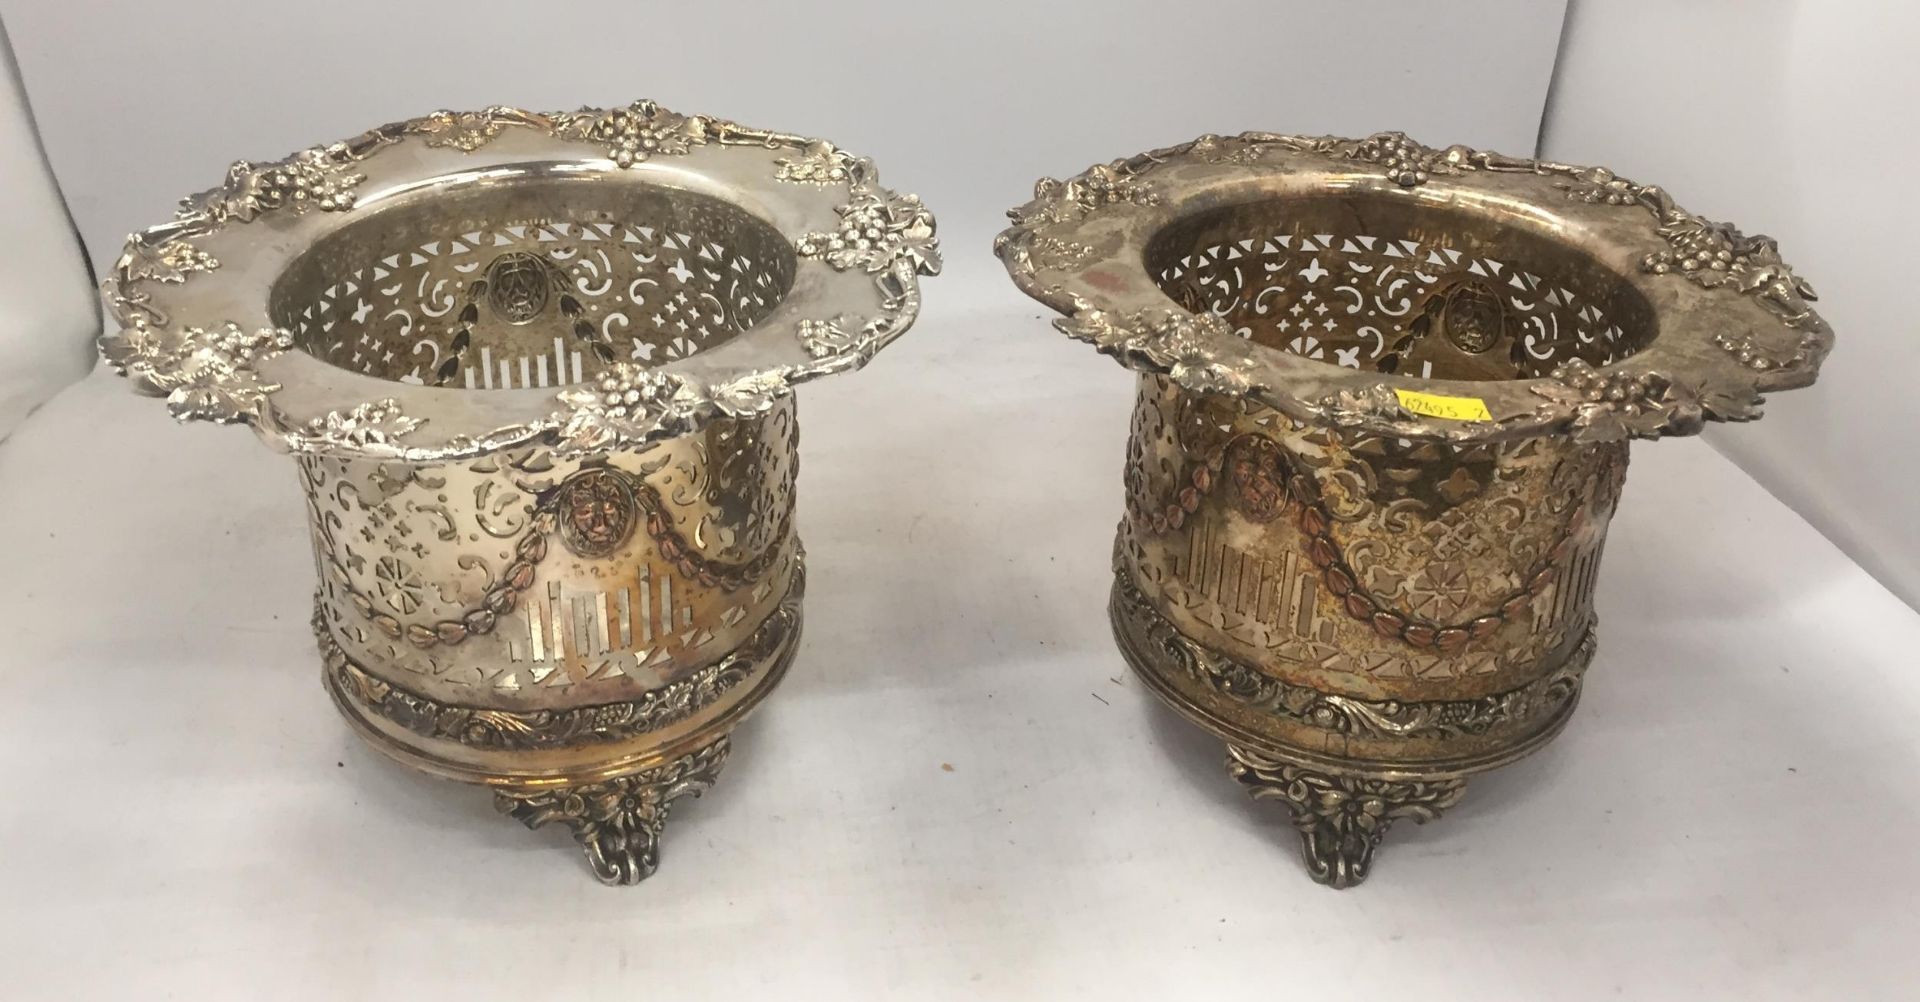 A PAIR OF EARLY 20TH CENTURY WINE BOTTLE HOLDERS WITH FLORAL AND PIERCED DESIGN